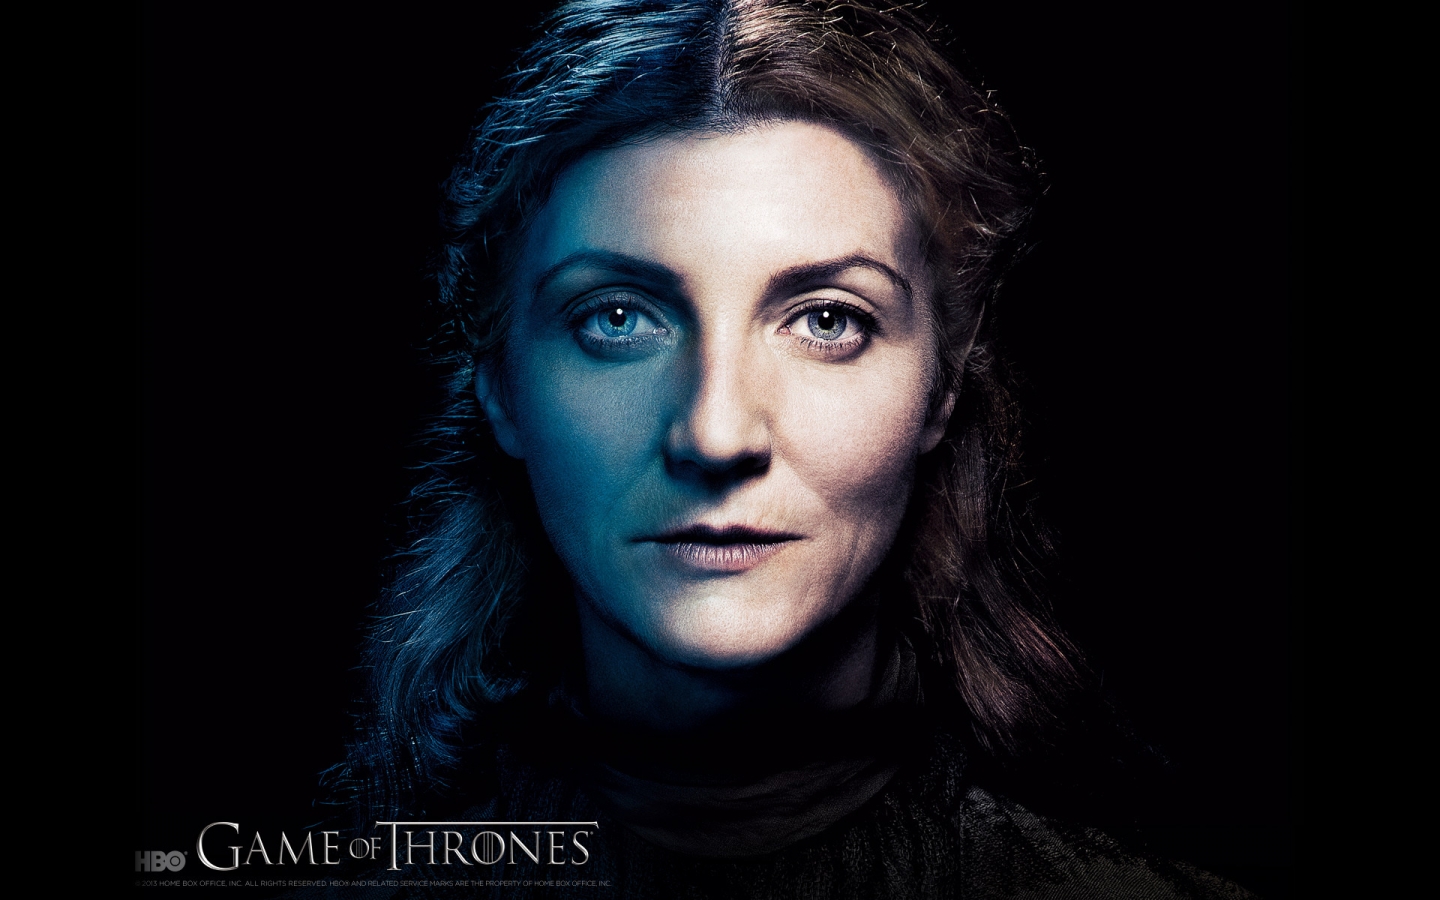 Catelyn Stark in Game of Thrones for 1440 x 900 widescreen resolution